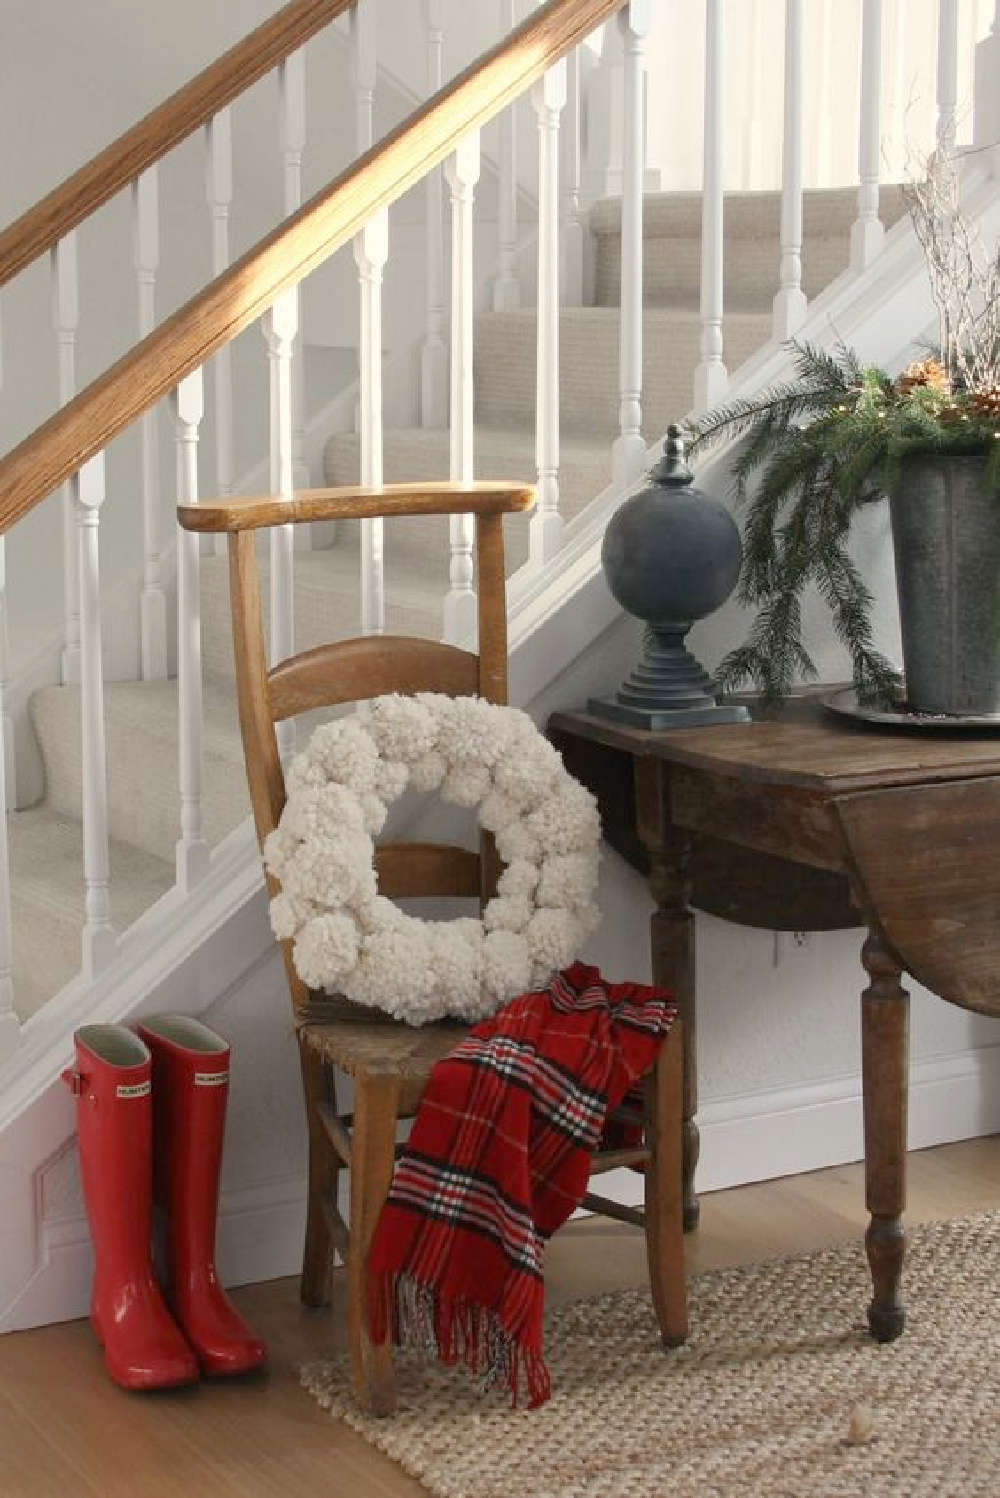 Christmas decor in a country house entry with red boots, red plaid scarf, wooly pom pom wreath, and fresh greenery. #hellolovelystudio #christmasdecor #redboots #pompomwreath